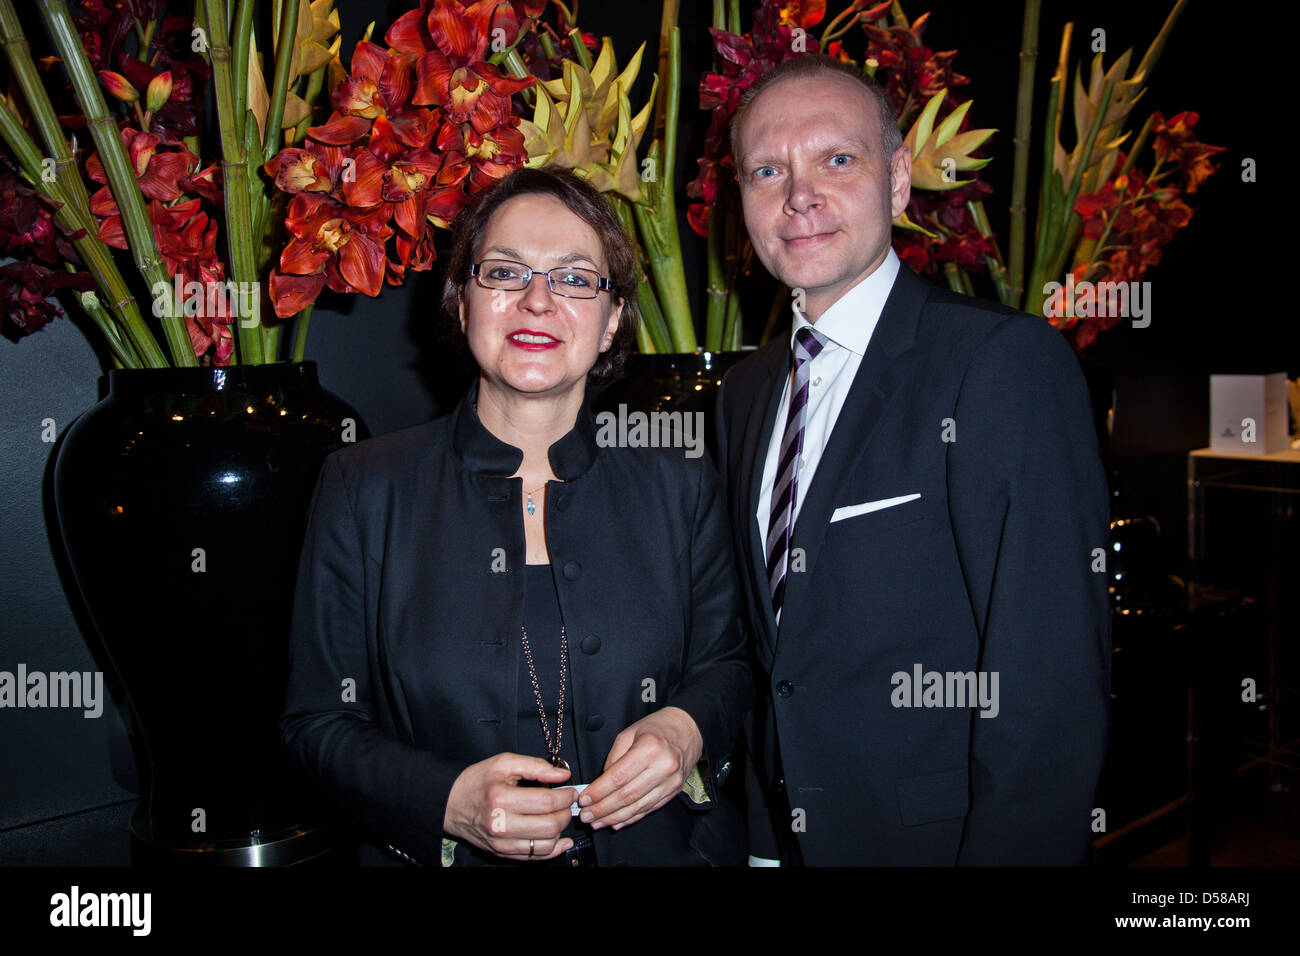 Ulrike Fohr (Manager of the Hotel The George) and Sven Zahn (CEO of the department store Alsterhaus) at 'Schoenes Hamburg' Stock Photo